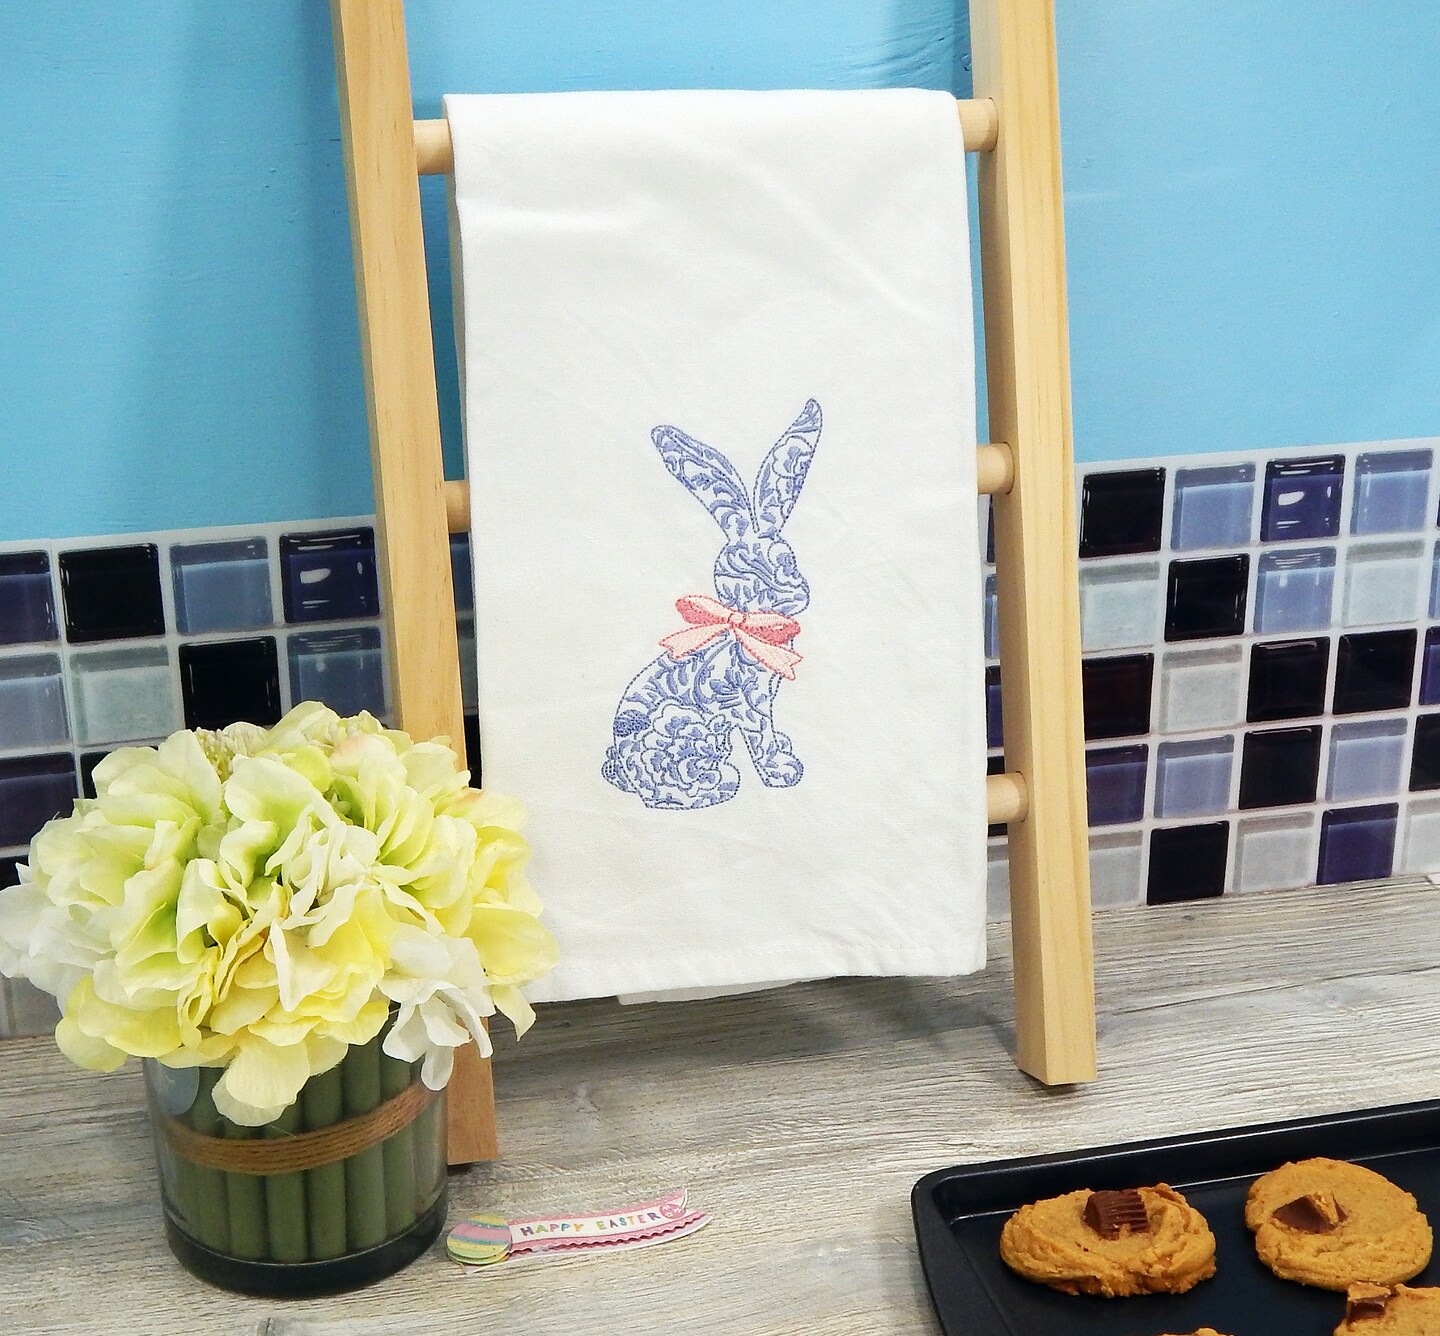 Blue Rabbit Easter Embroidered Tea Towel - Chinoiserie Bunny - Spring Hare - Kitchen Decor - Holiday Dish Towel - Gift Idea - Blue Toile 285251553638940673